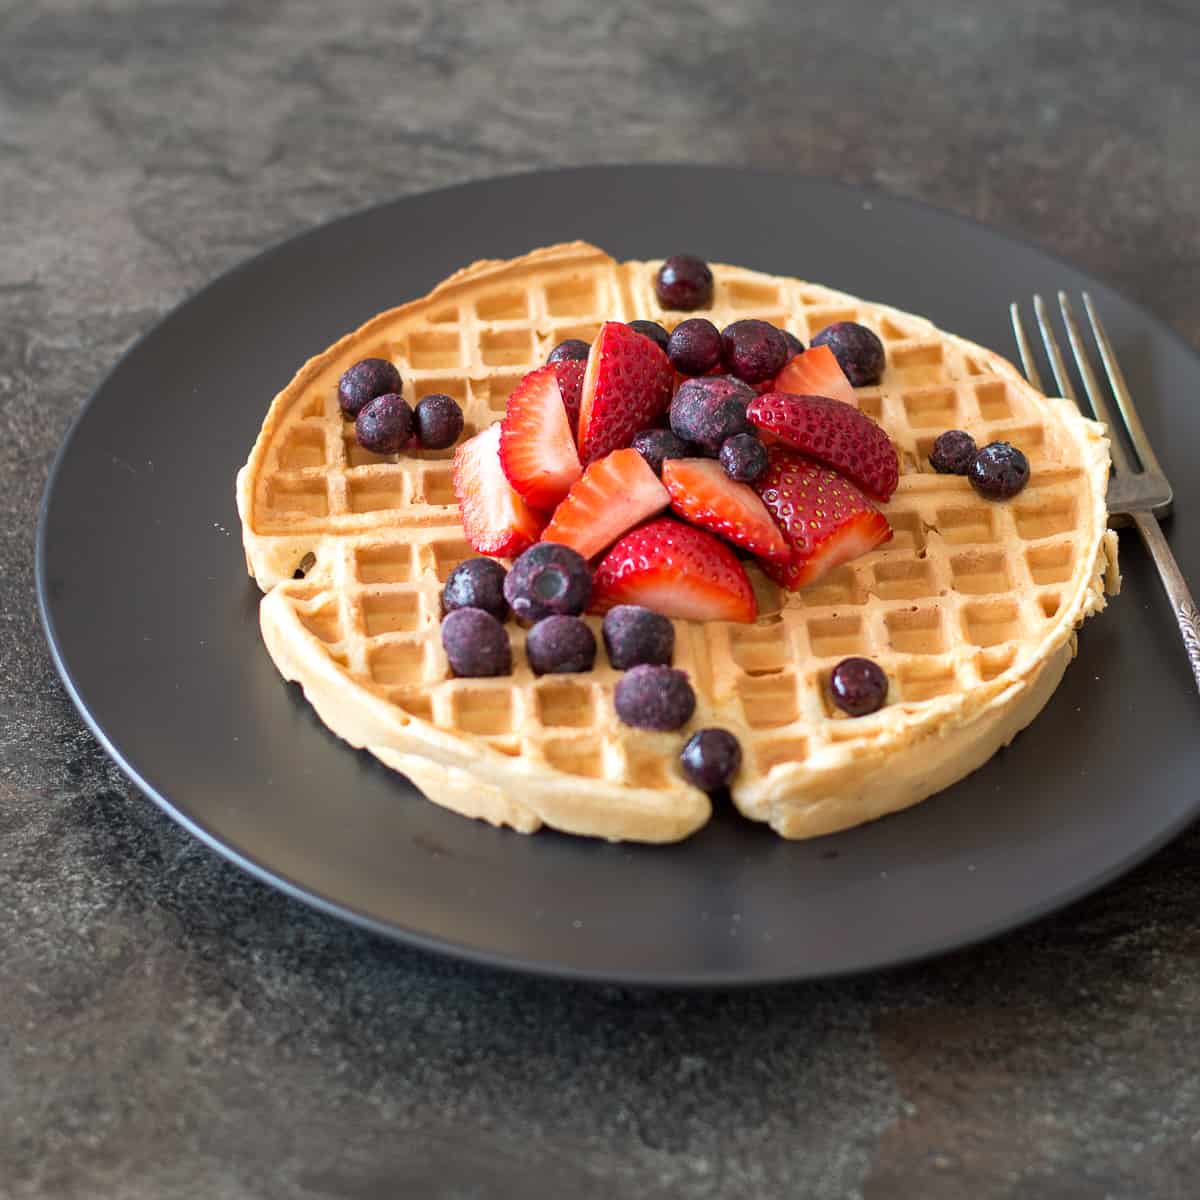 Wholemeal waffles topped with strawberries and blueberries on dark plate